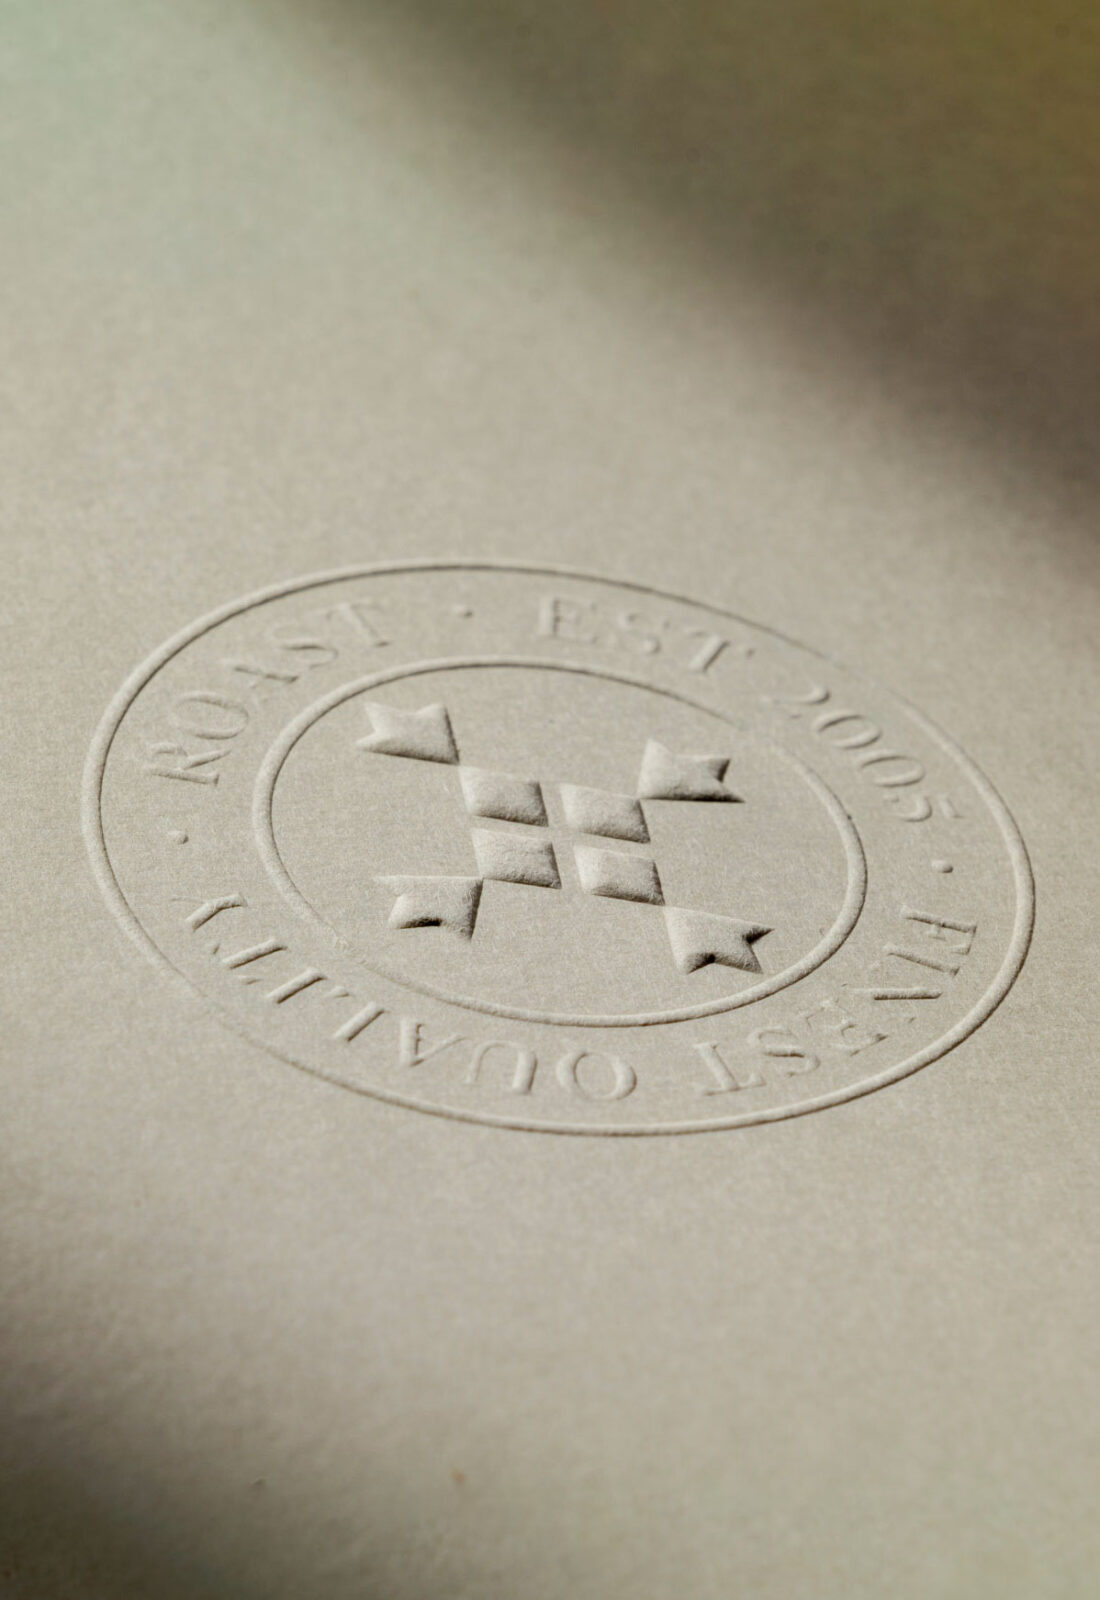 Detail of logo, crest, seal of quality embossed on paper, modern, traditional british and unique brand identity for Roast Borough Market designed by 3Stories Interior Design and Branding creative agency London